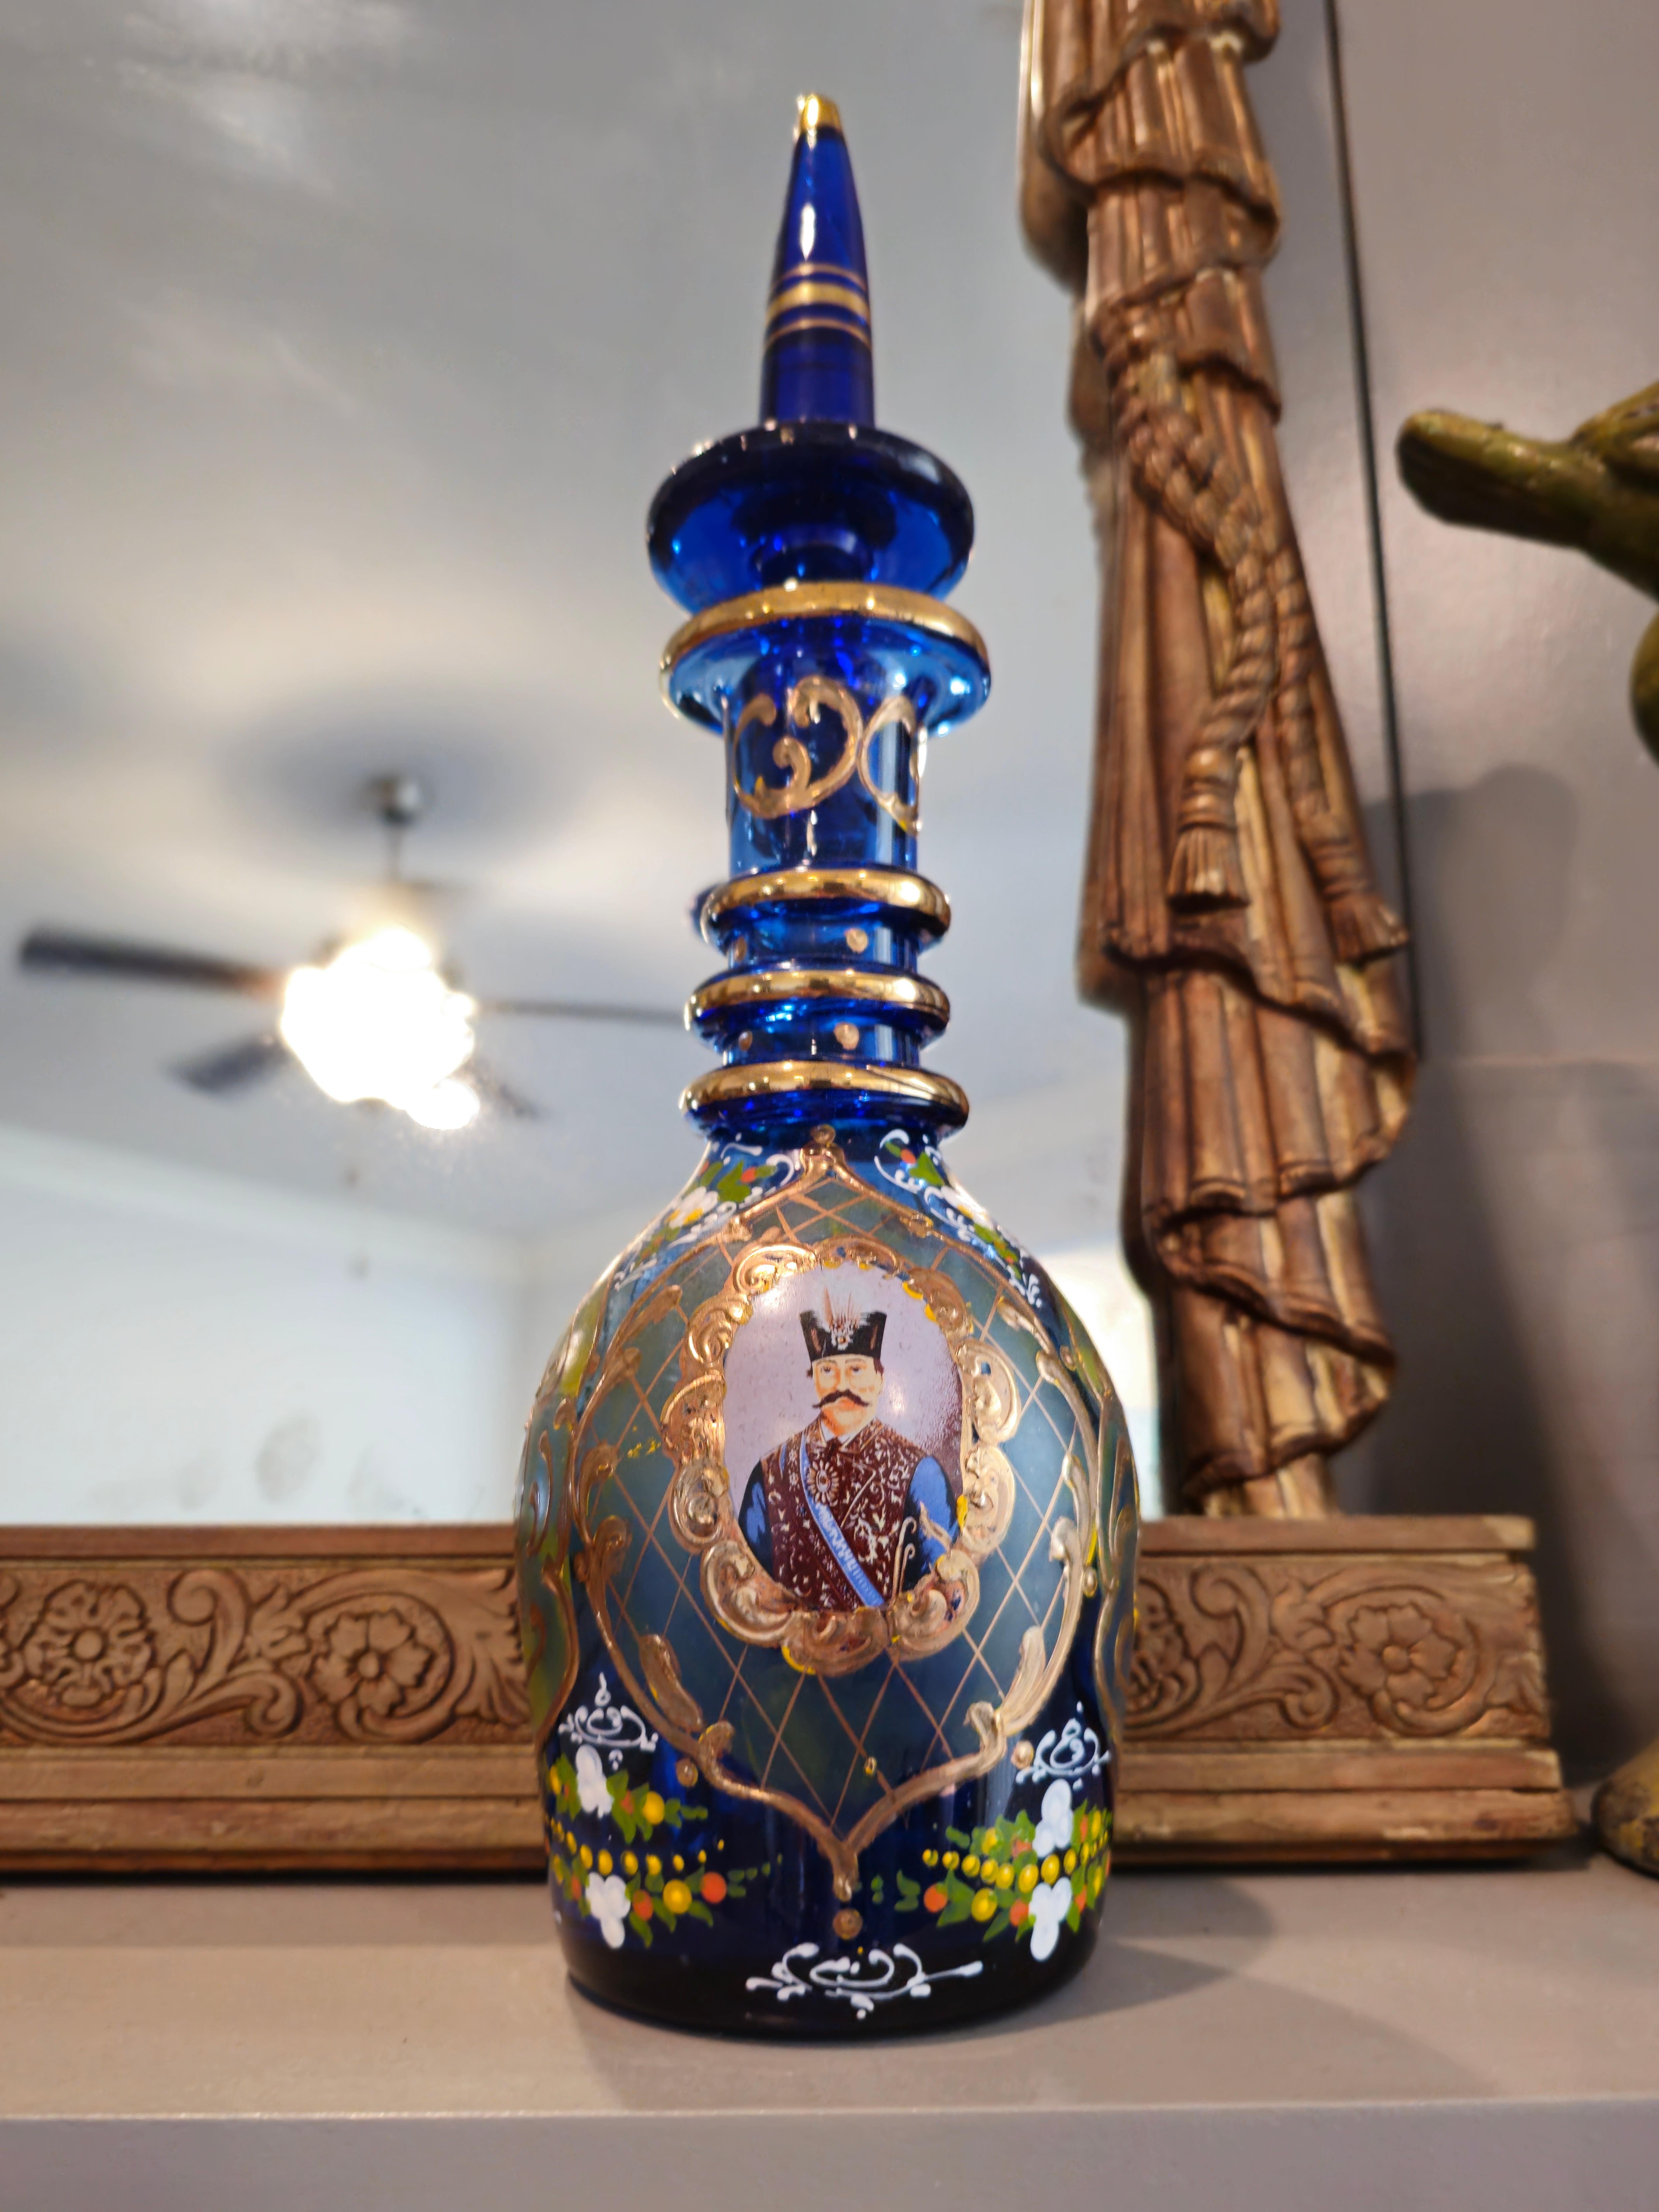 A scarce pair of fine quality antique Bohemian parcel gilt enameled light cobalt blue glass decanter bottles, exquisitely decorated for the Persian market. circa 1890

Handmade in Bohemia (present day Czech Republic) in the late 19th century, home